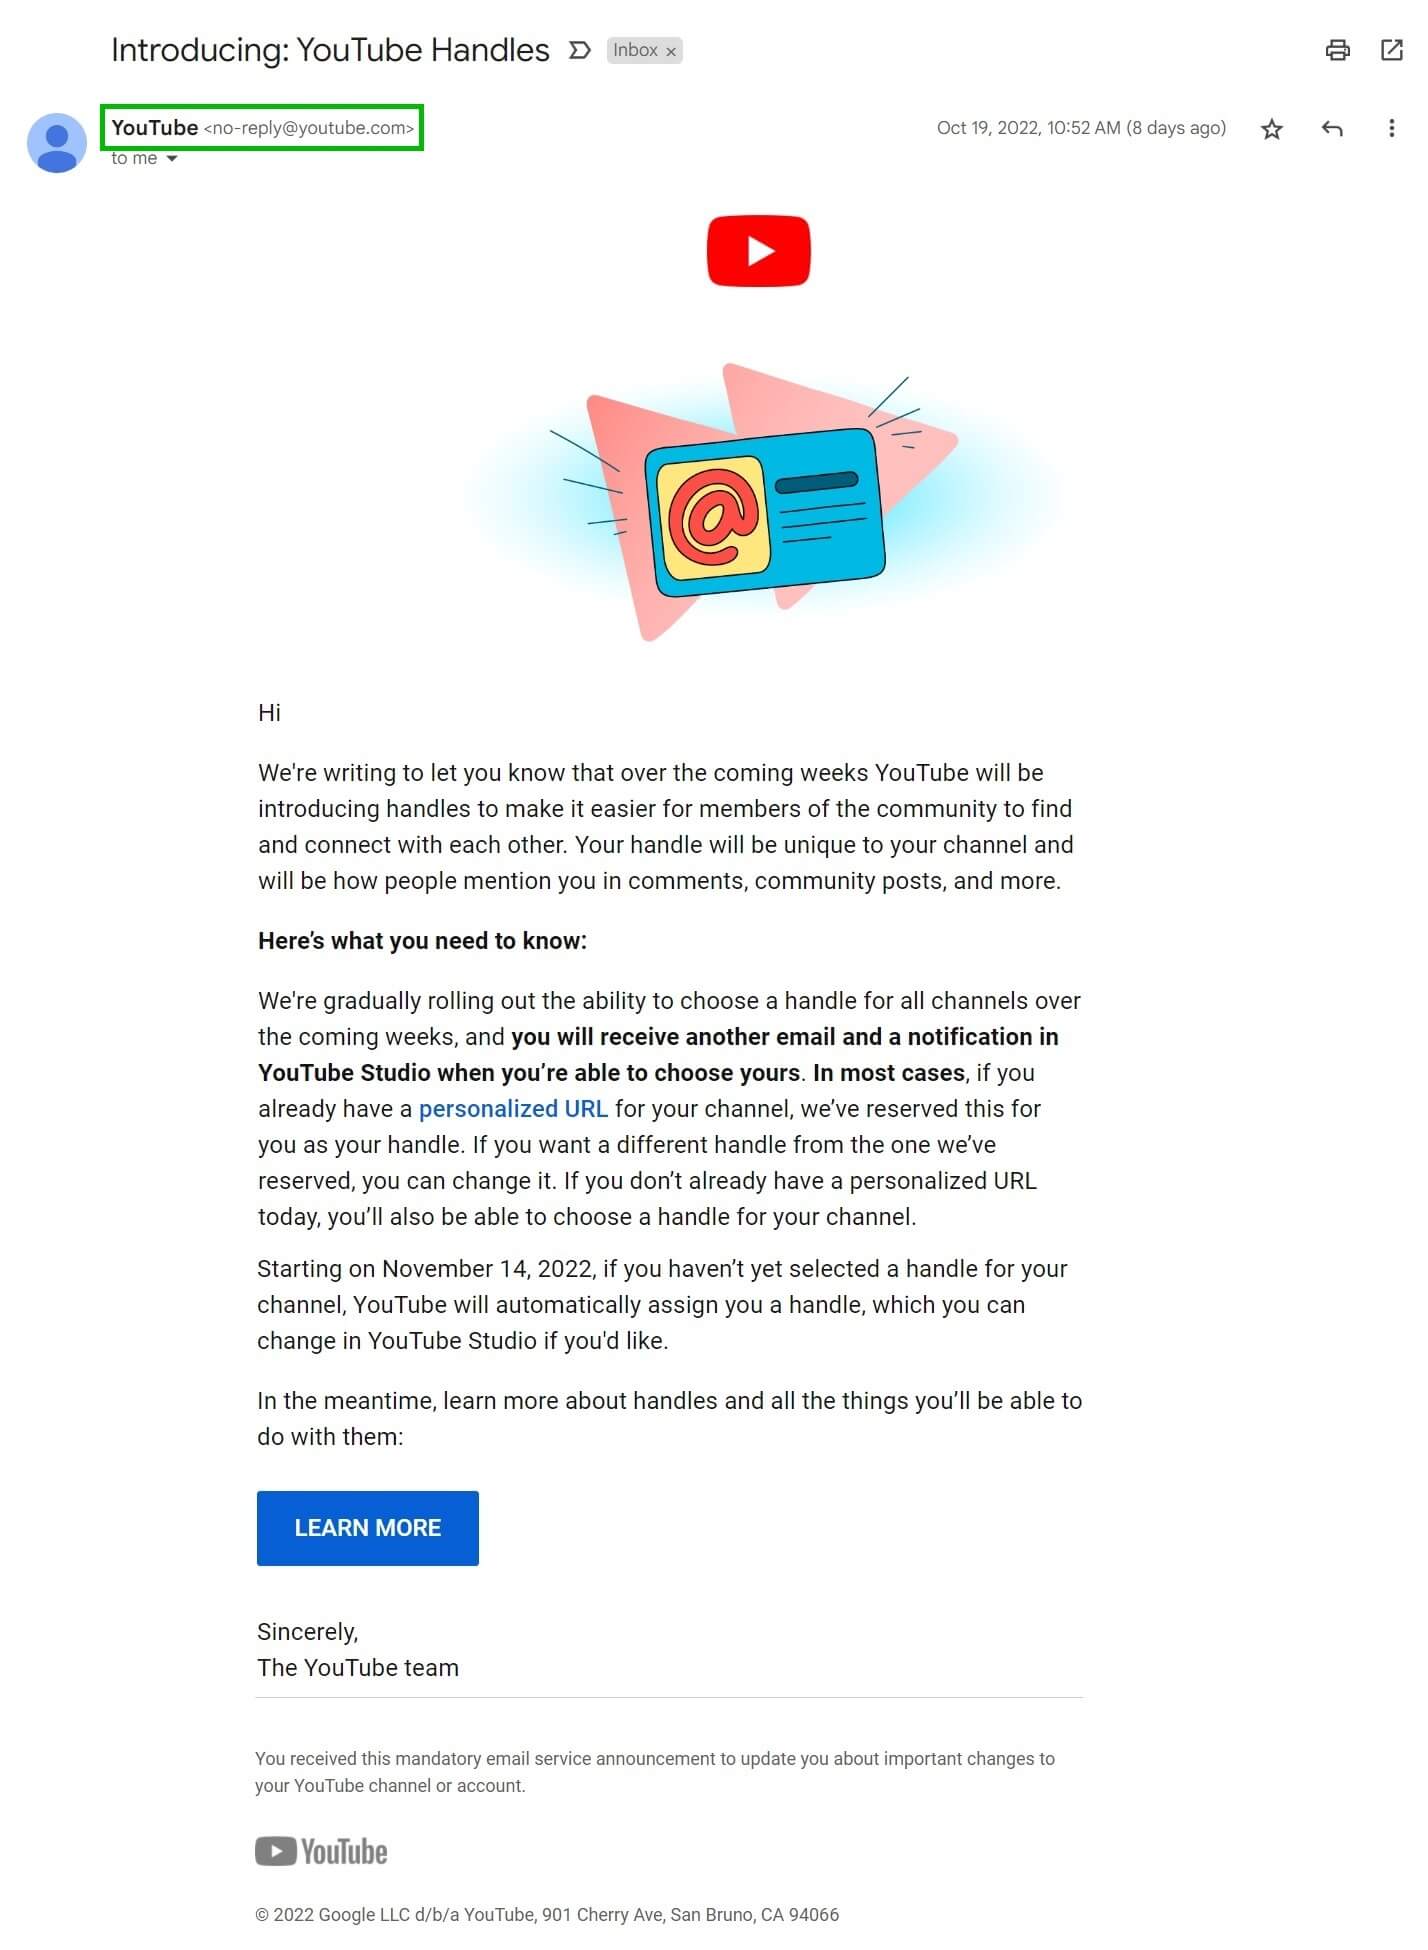 No-reply email from YouTube